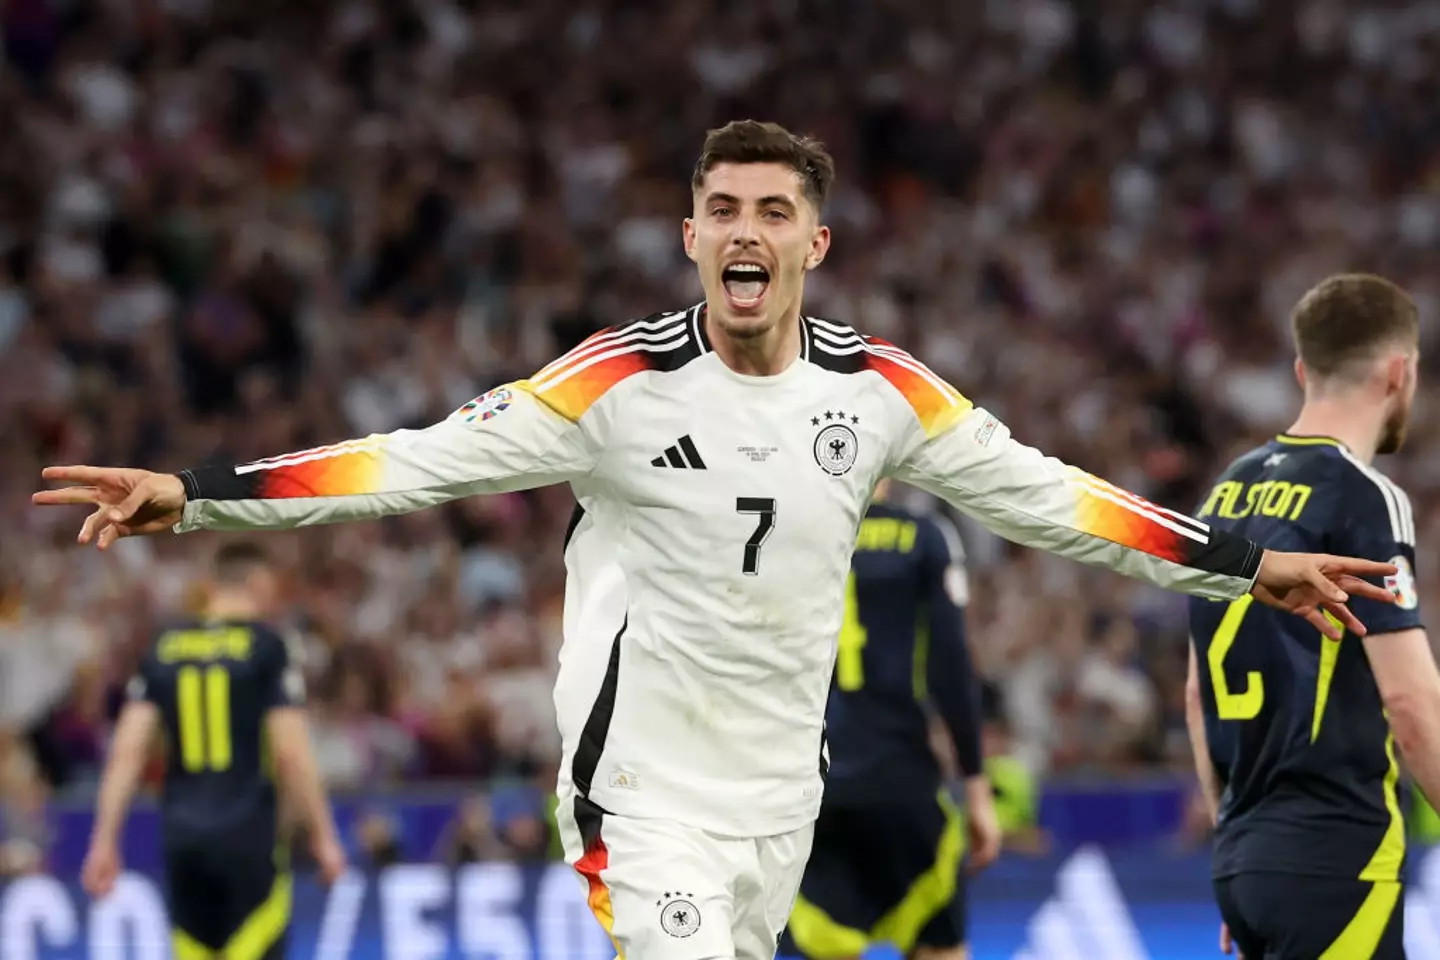 Arsenal's Kai Havertz scored the third goal of Germany's 5-1 victory over Scotland (Image: Getty)